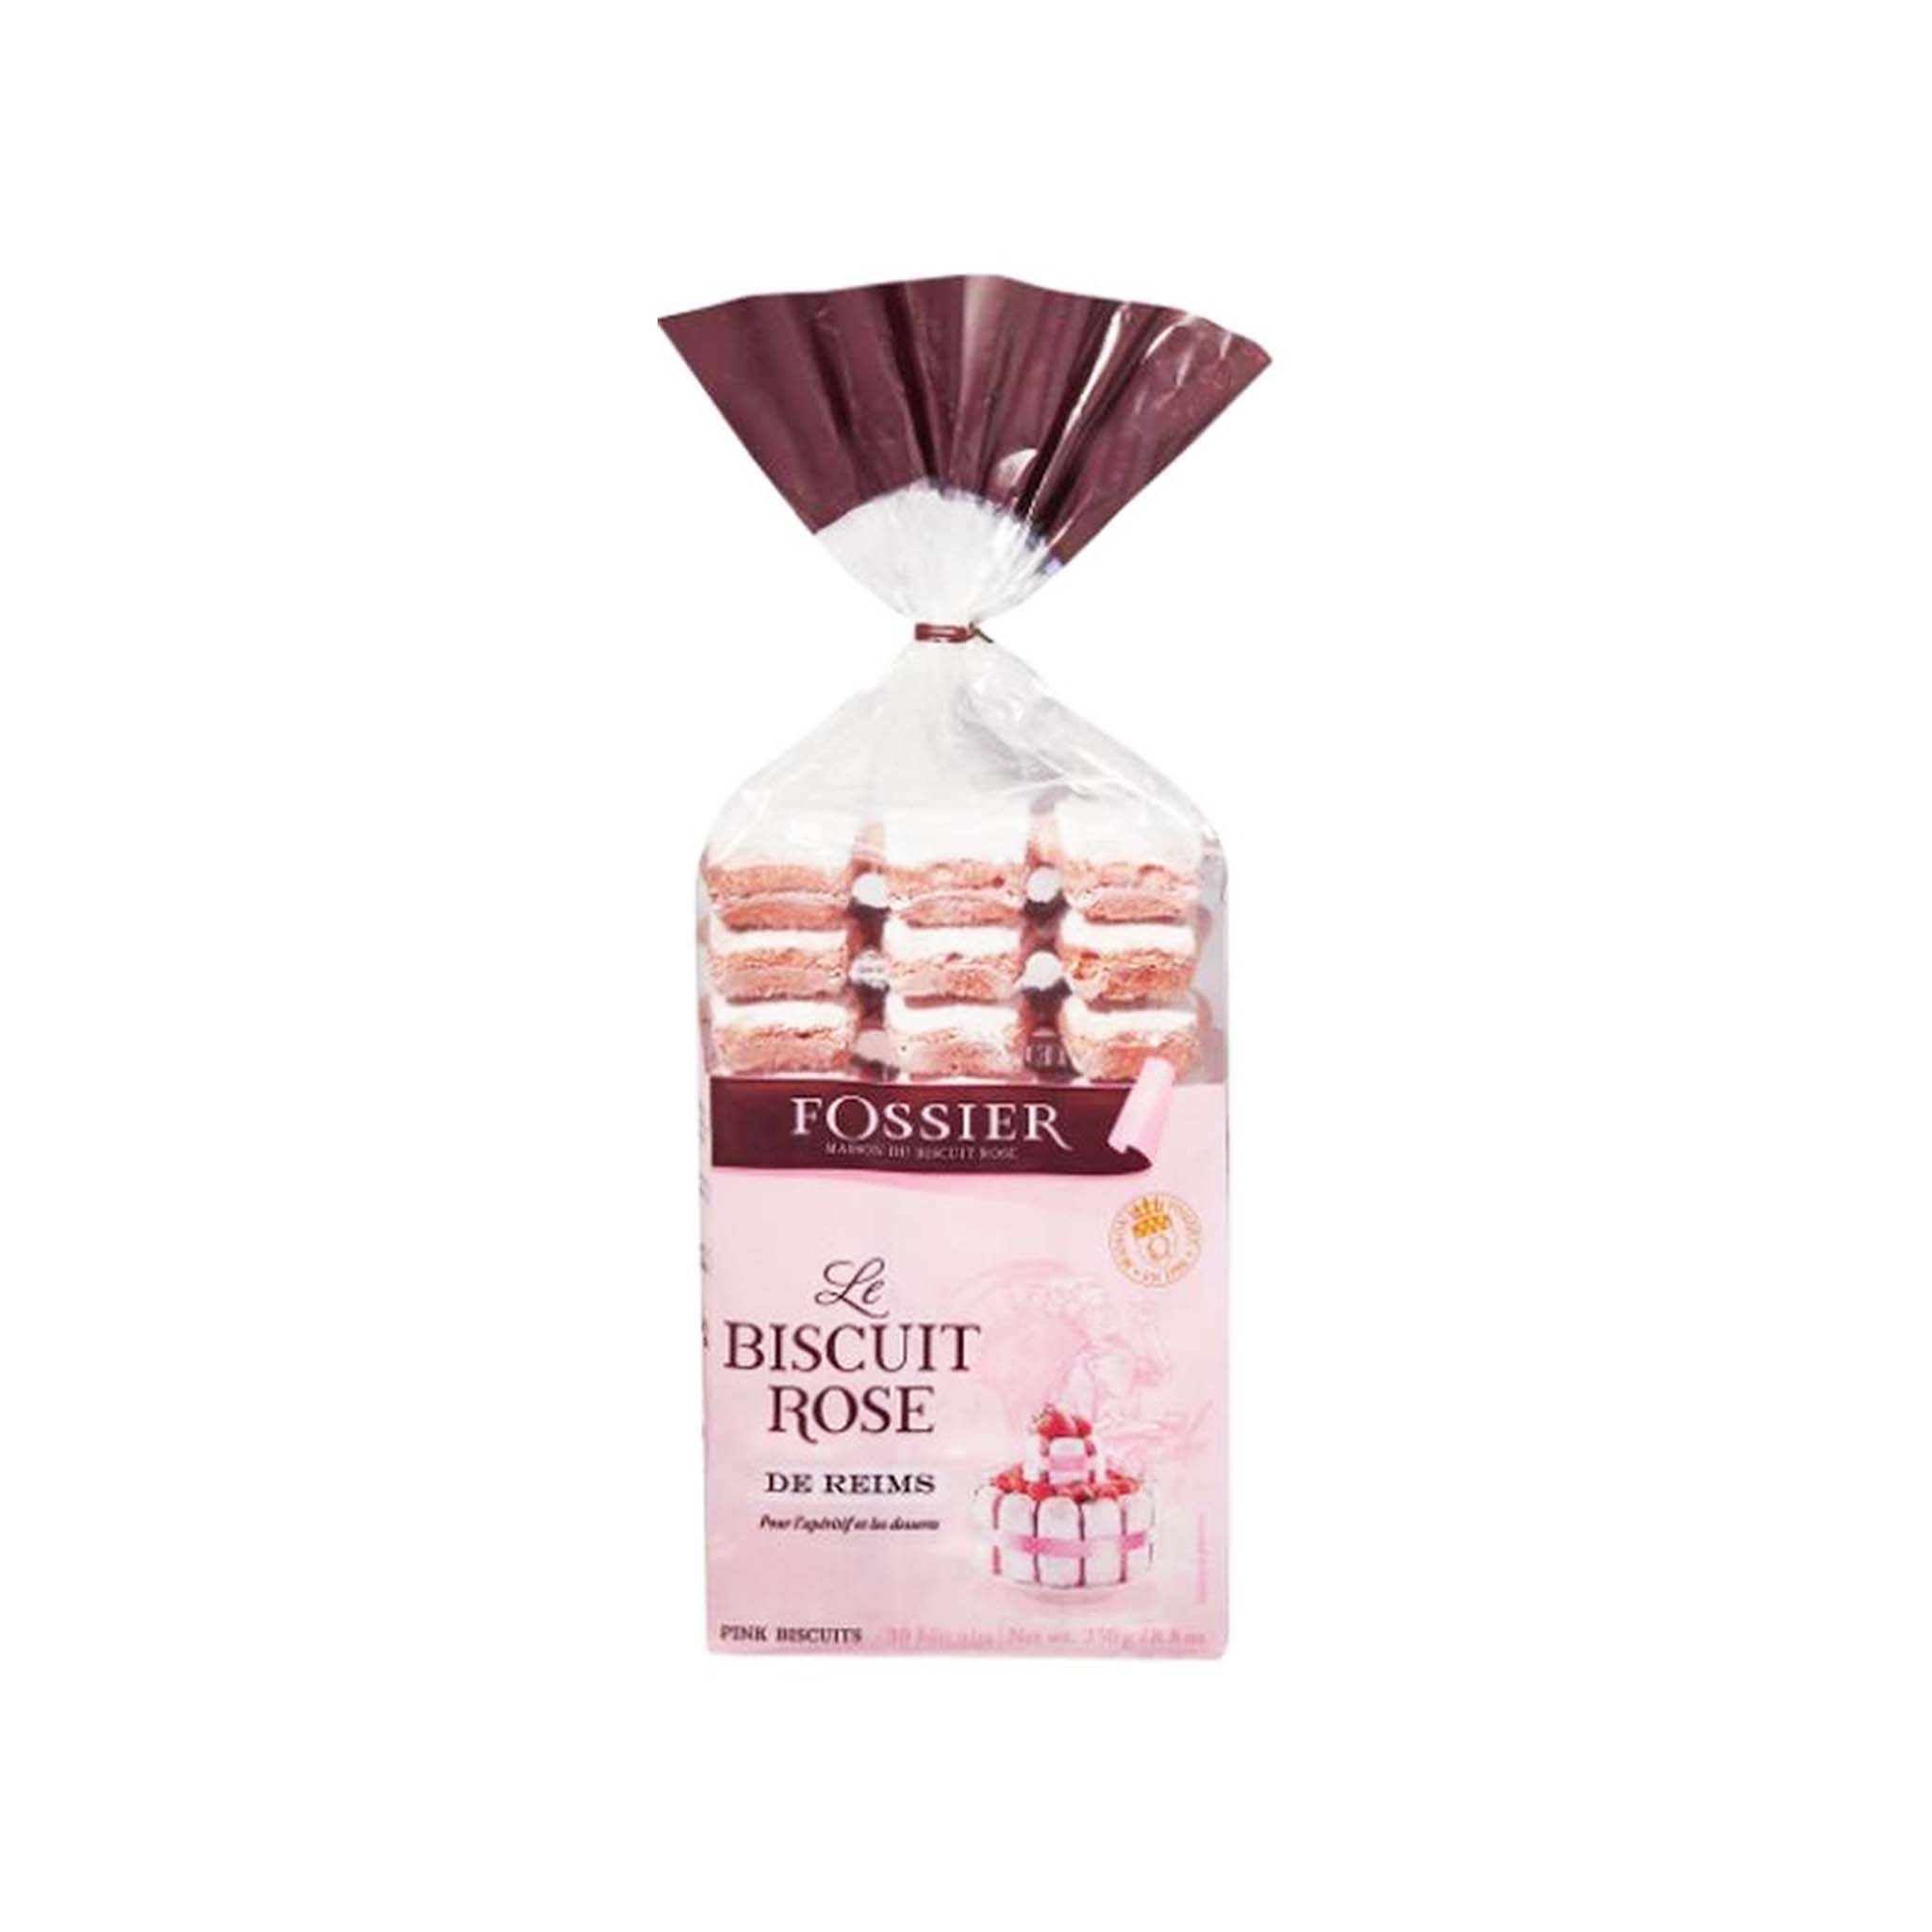 FOSSIER ROSE PINK BISCUITS SACHET 250g